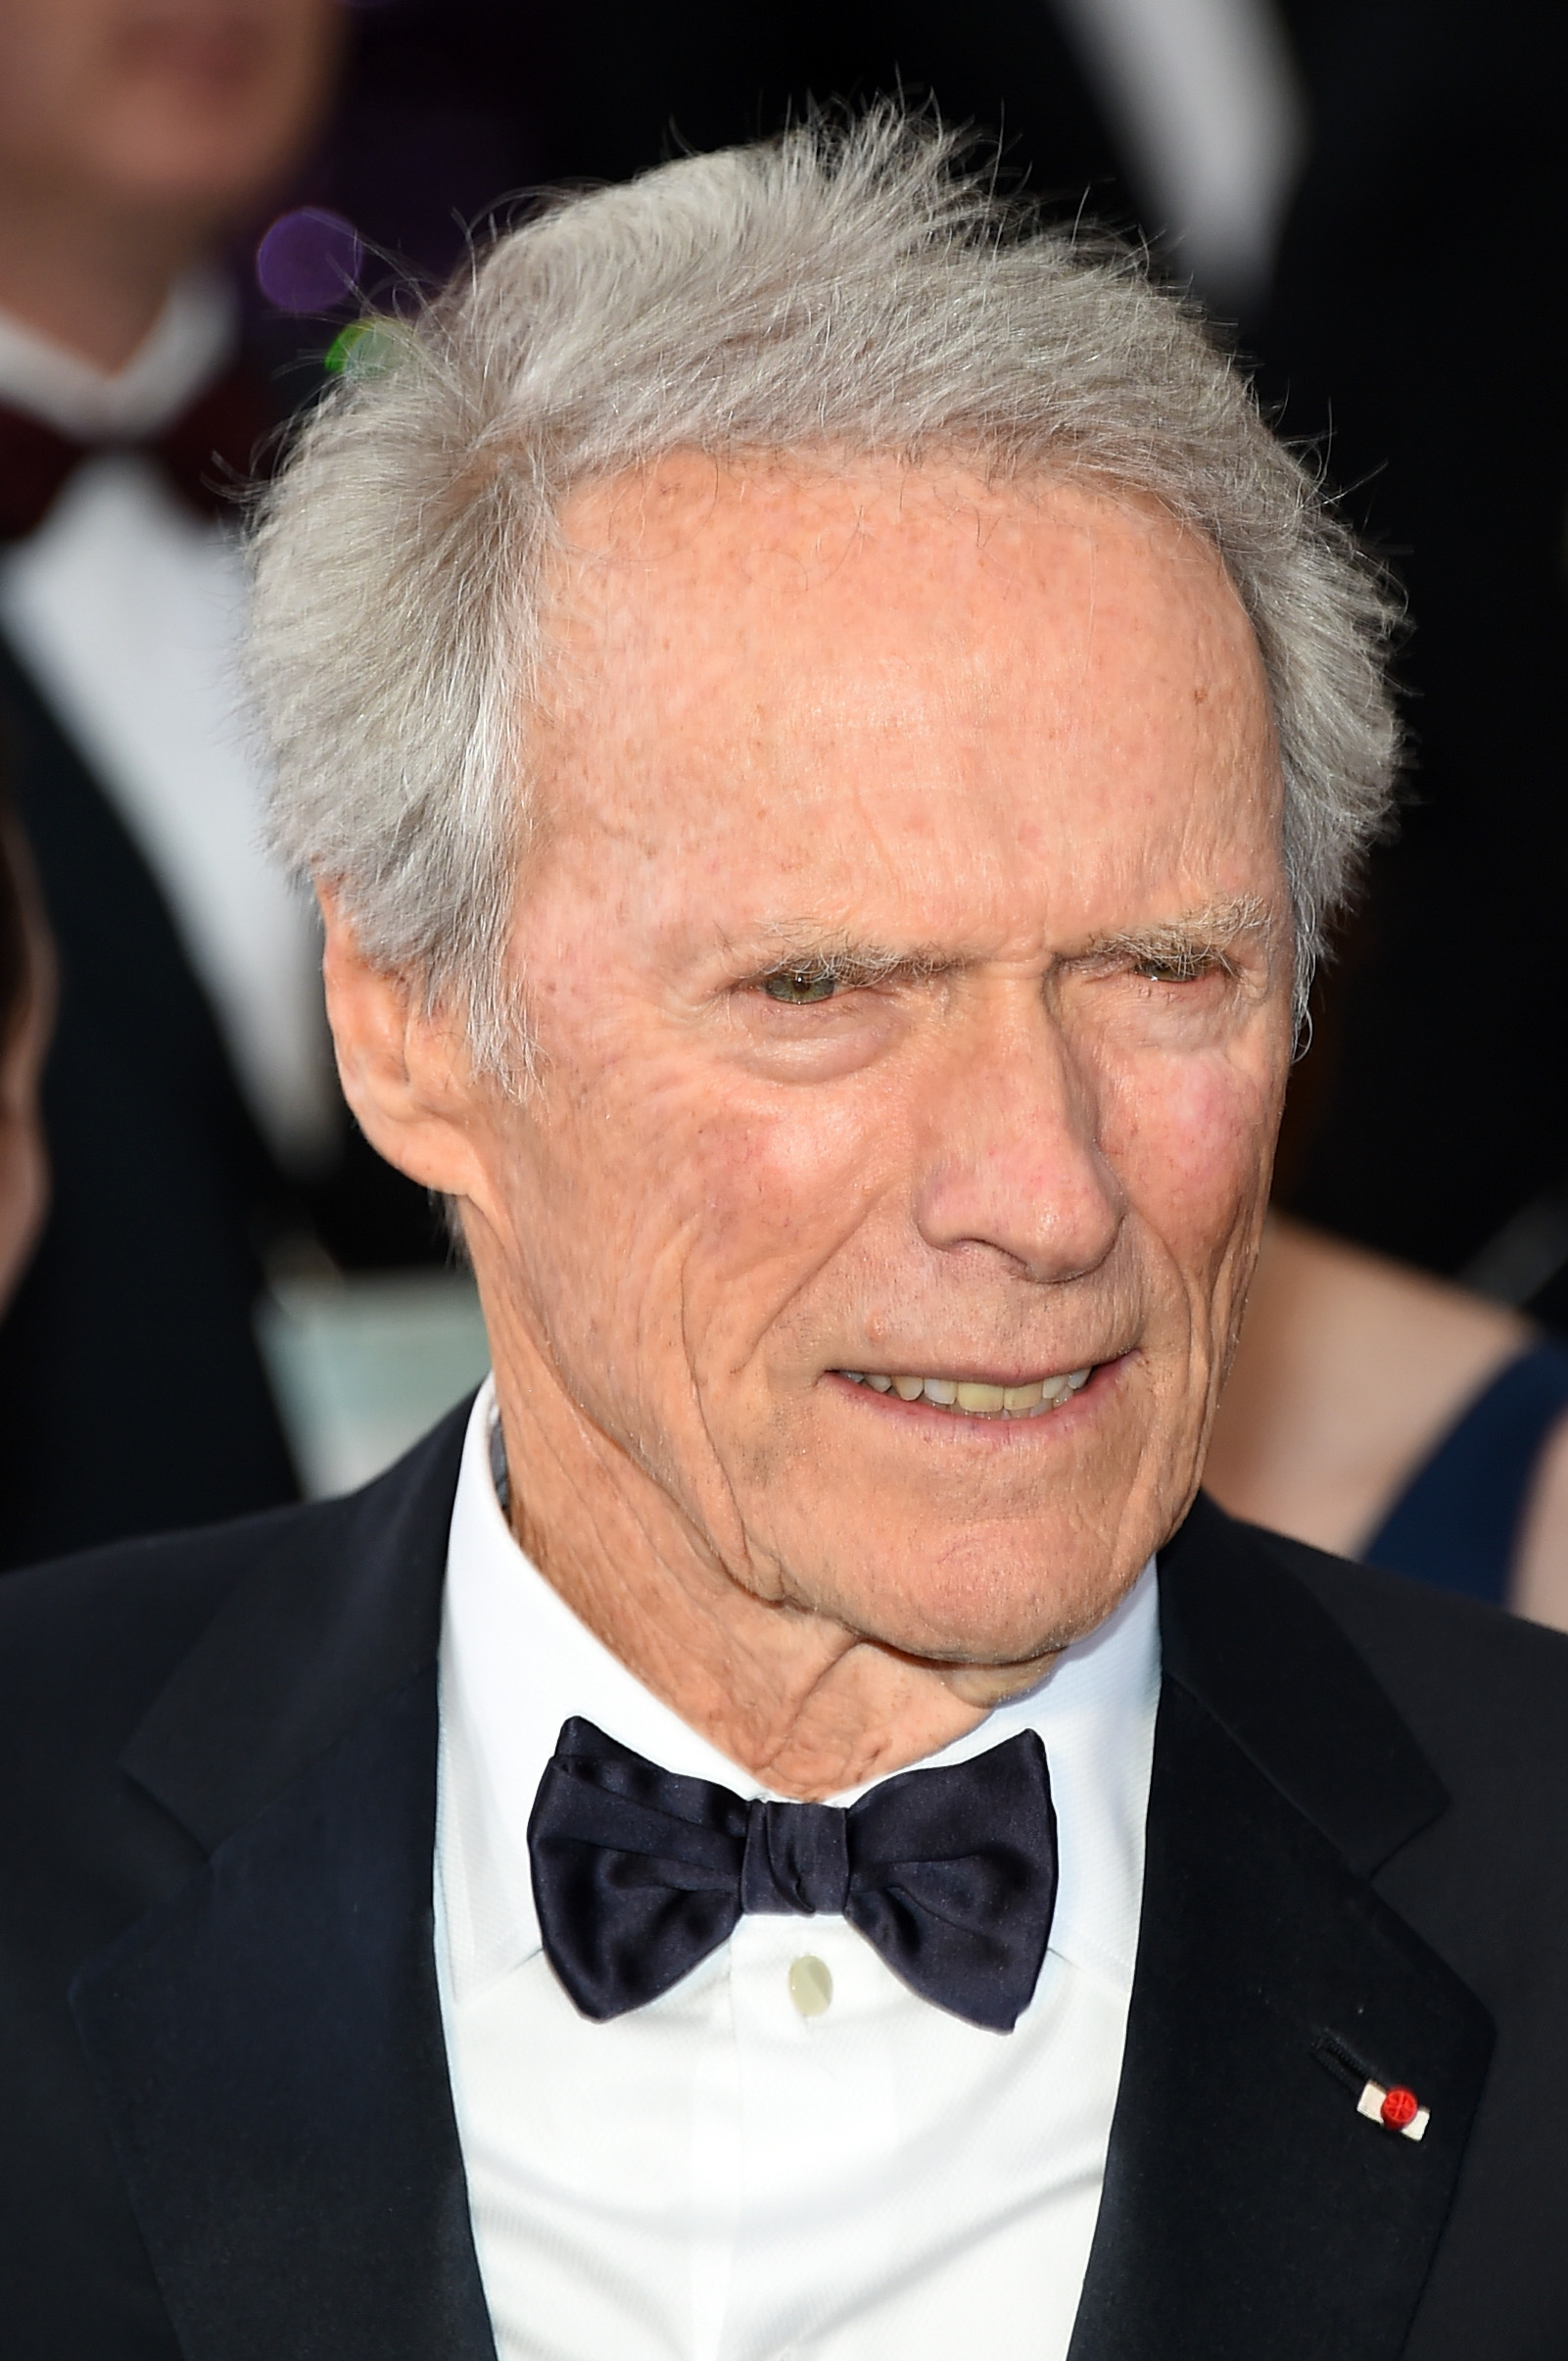 Actor/director Clint Eastwood attends the 87th Annual Academy Awards at Hollywood &amp; Highland Center on February 22, 2015 in Hollywood, California.  (Photo by Ethan Miller/WireImage) (Ethan Miller&mdash;WireImage)